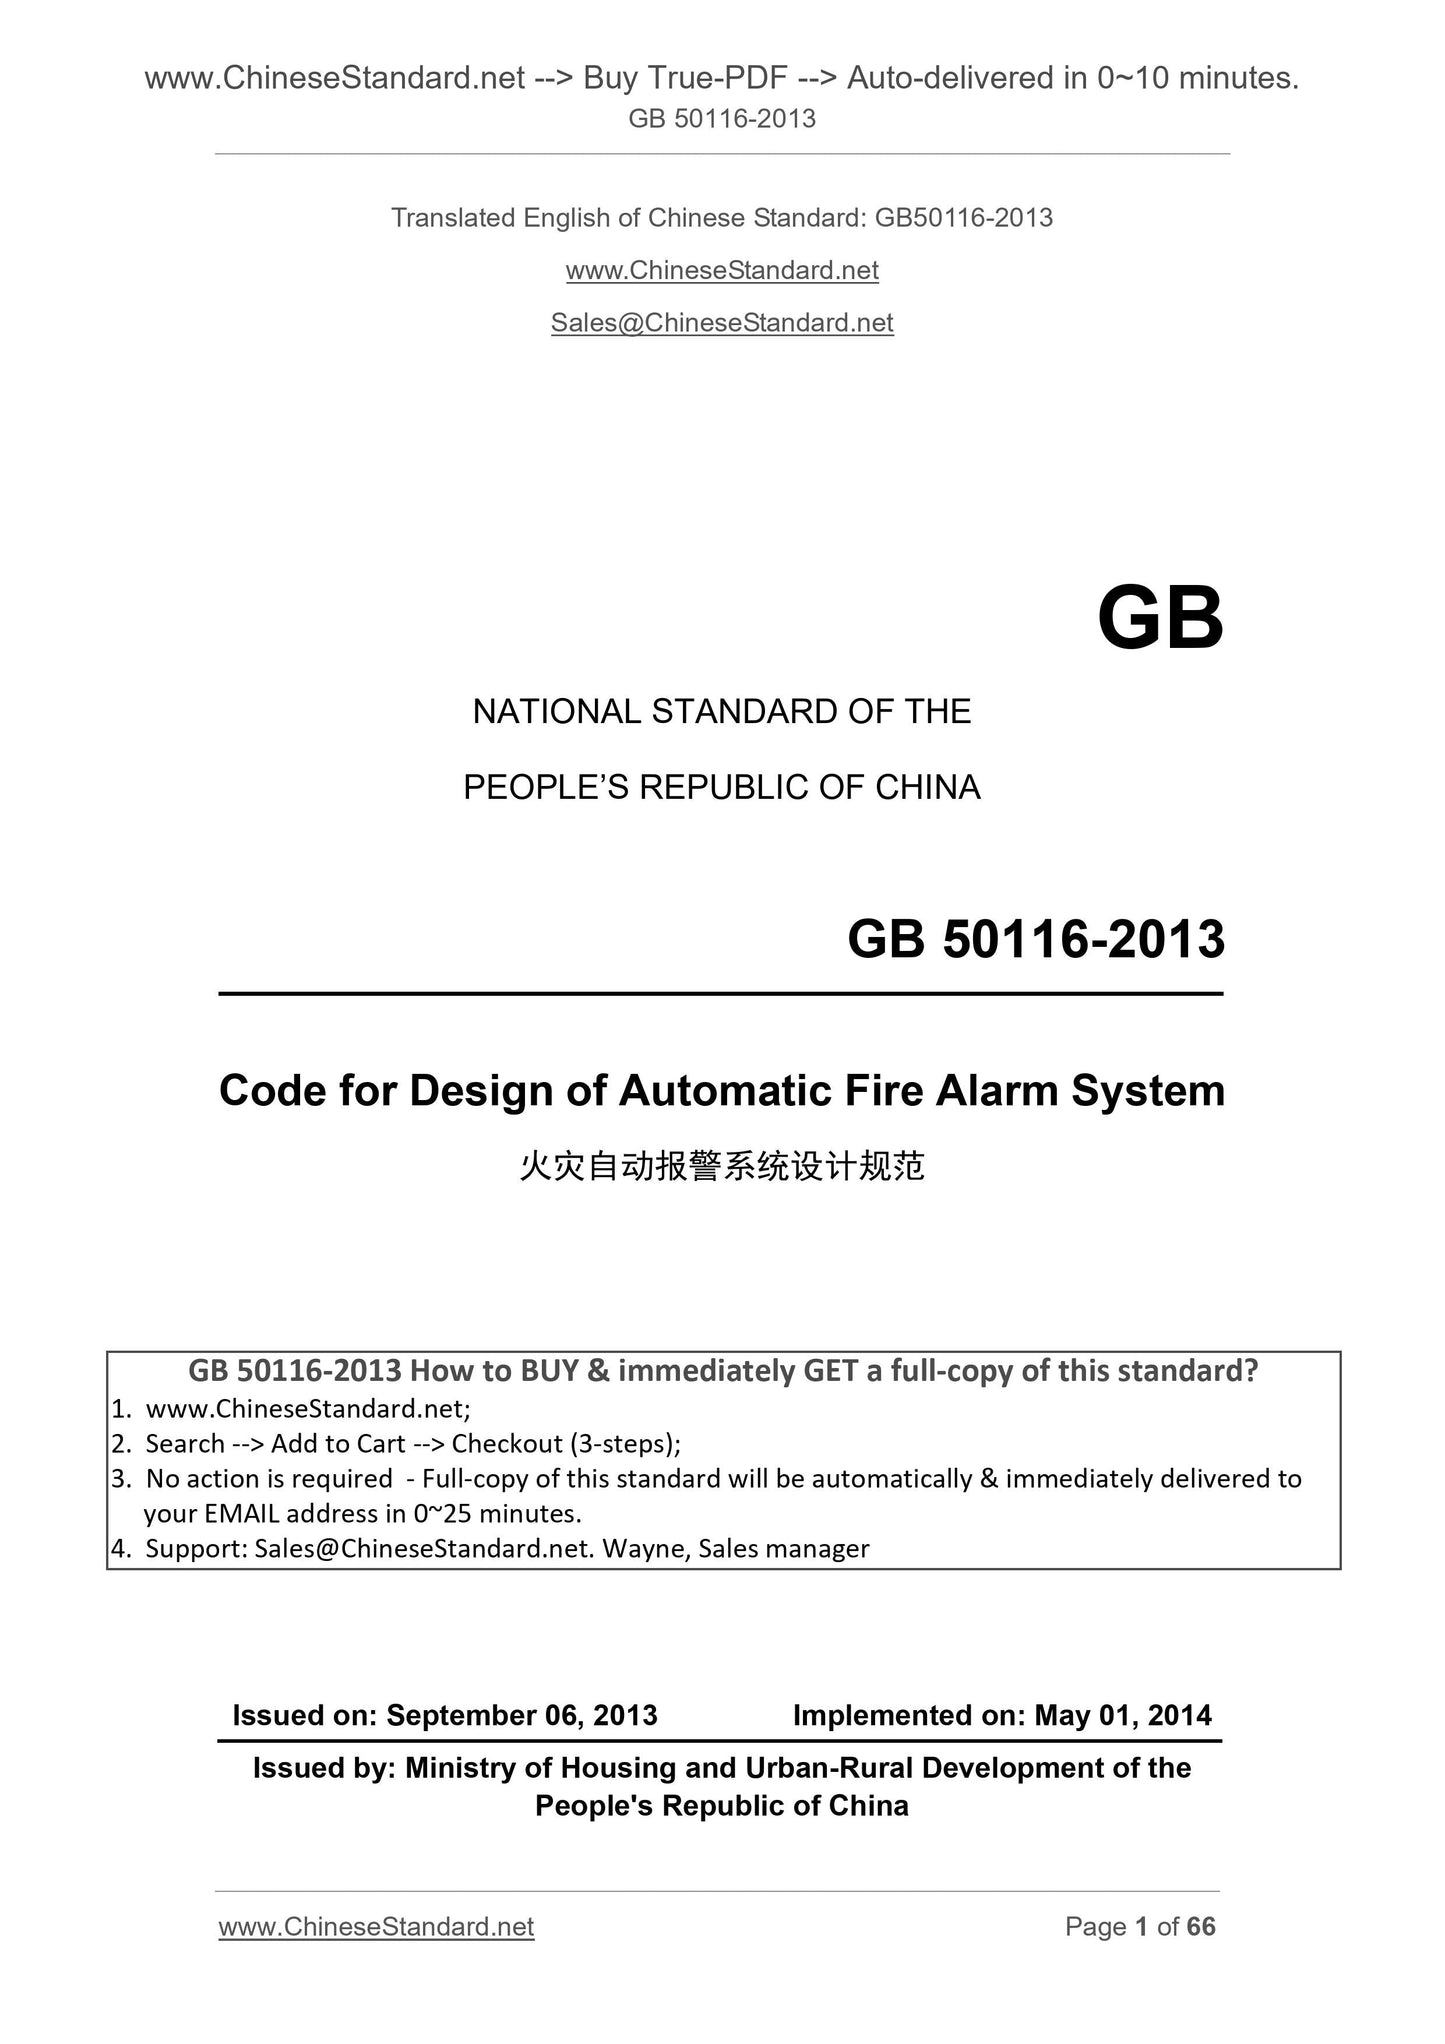 GB 50116-2013 Page 1